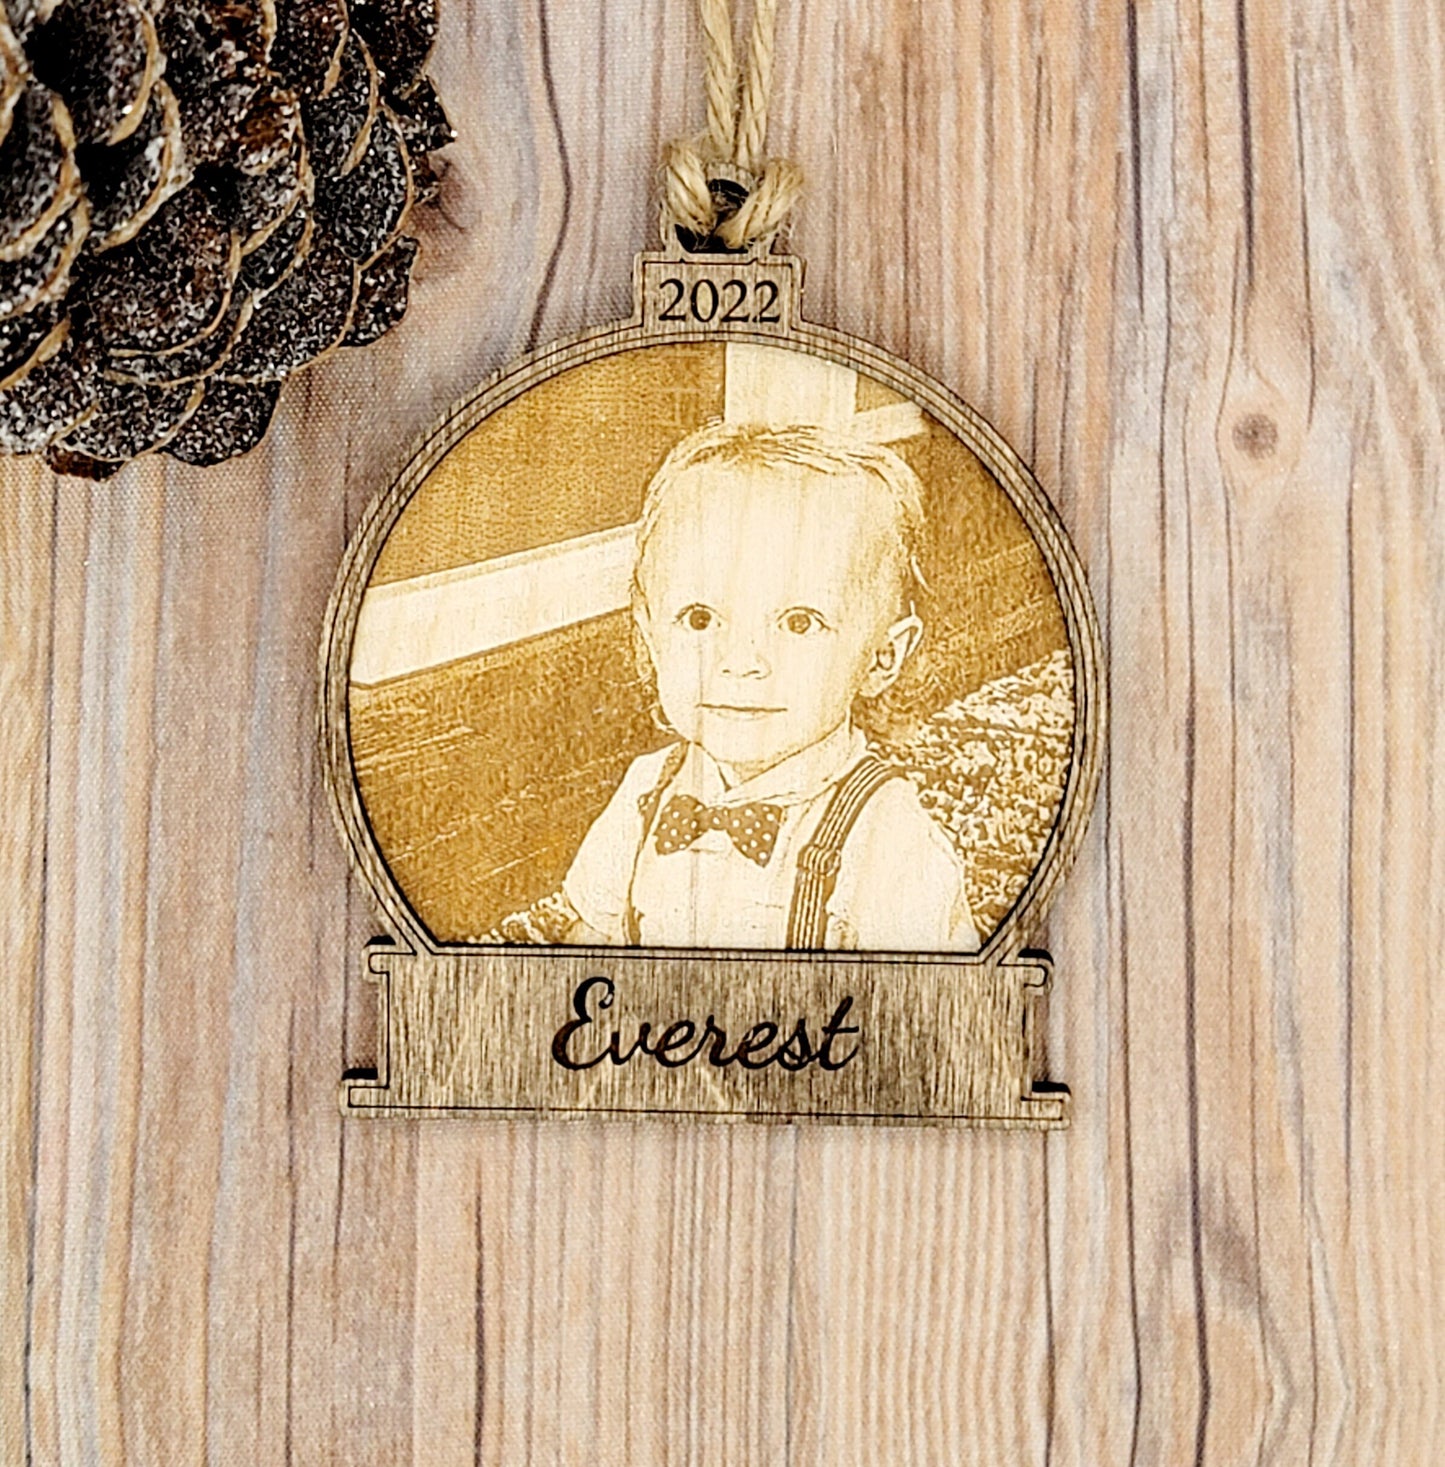 Engraved Picture / Photo Personalize Snow Globe Christmas Ornament | Christmas 2022 | Family Gift | Keepsake